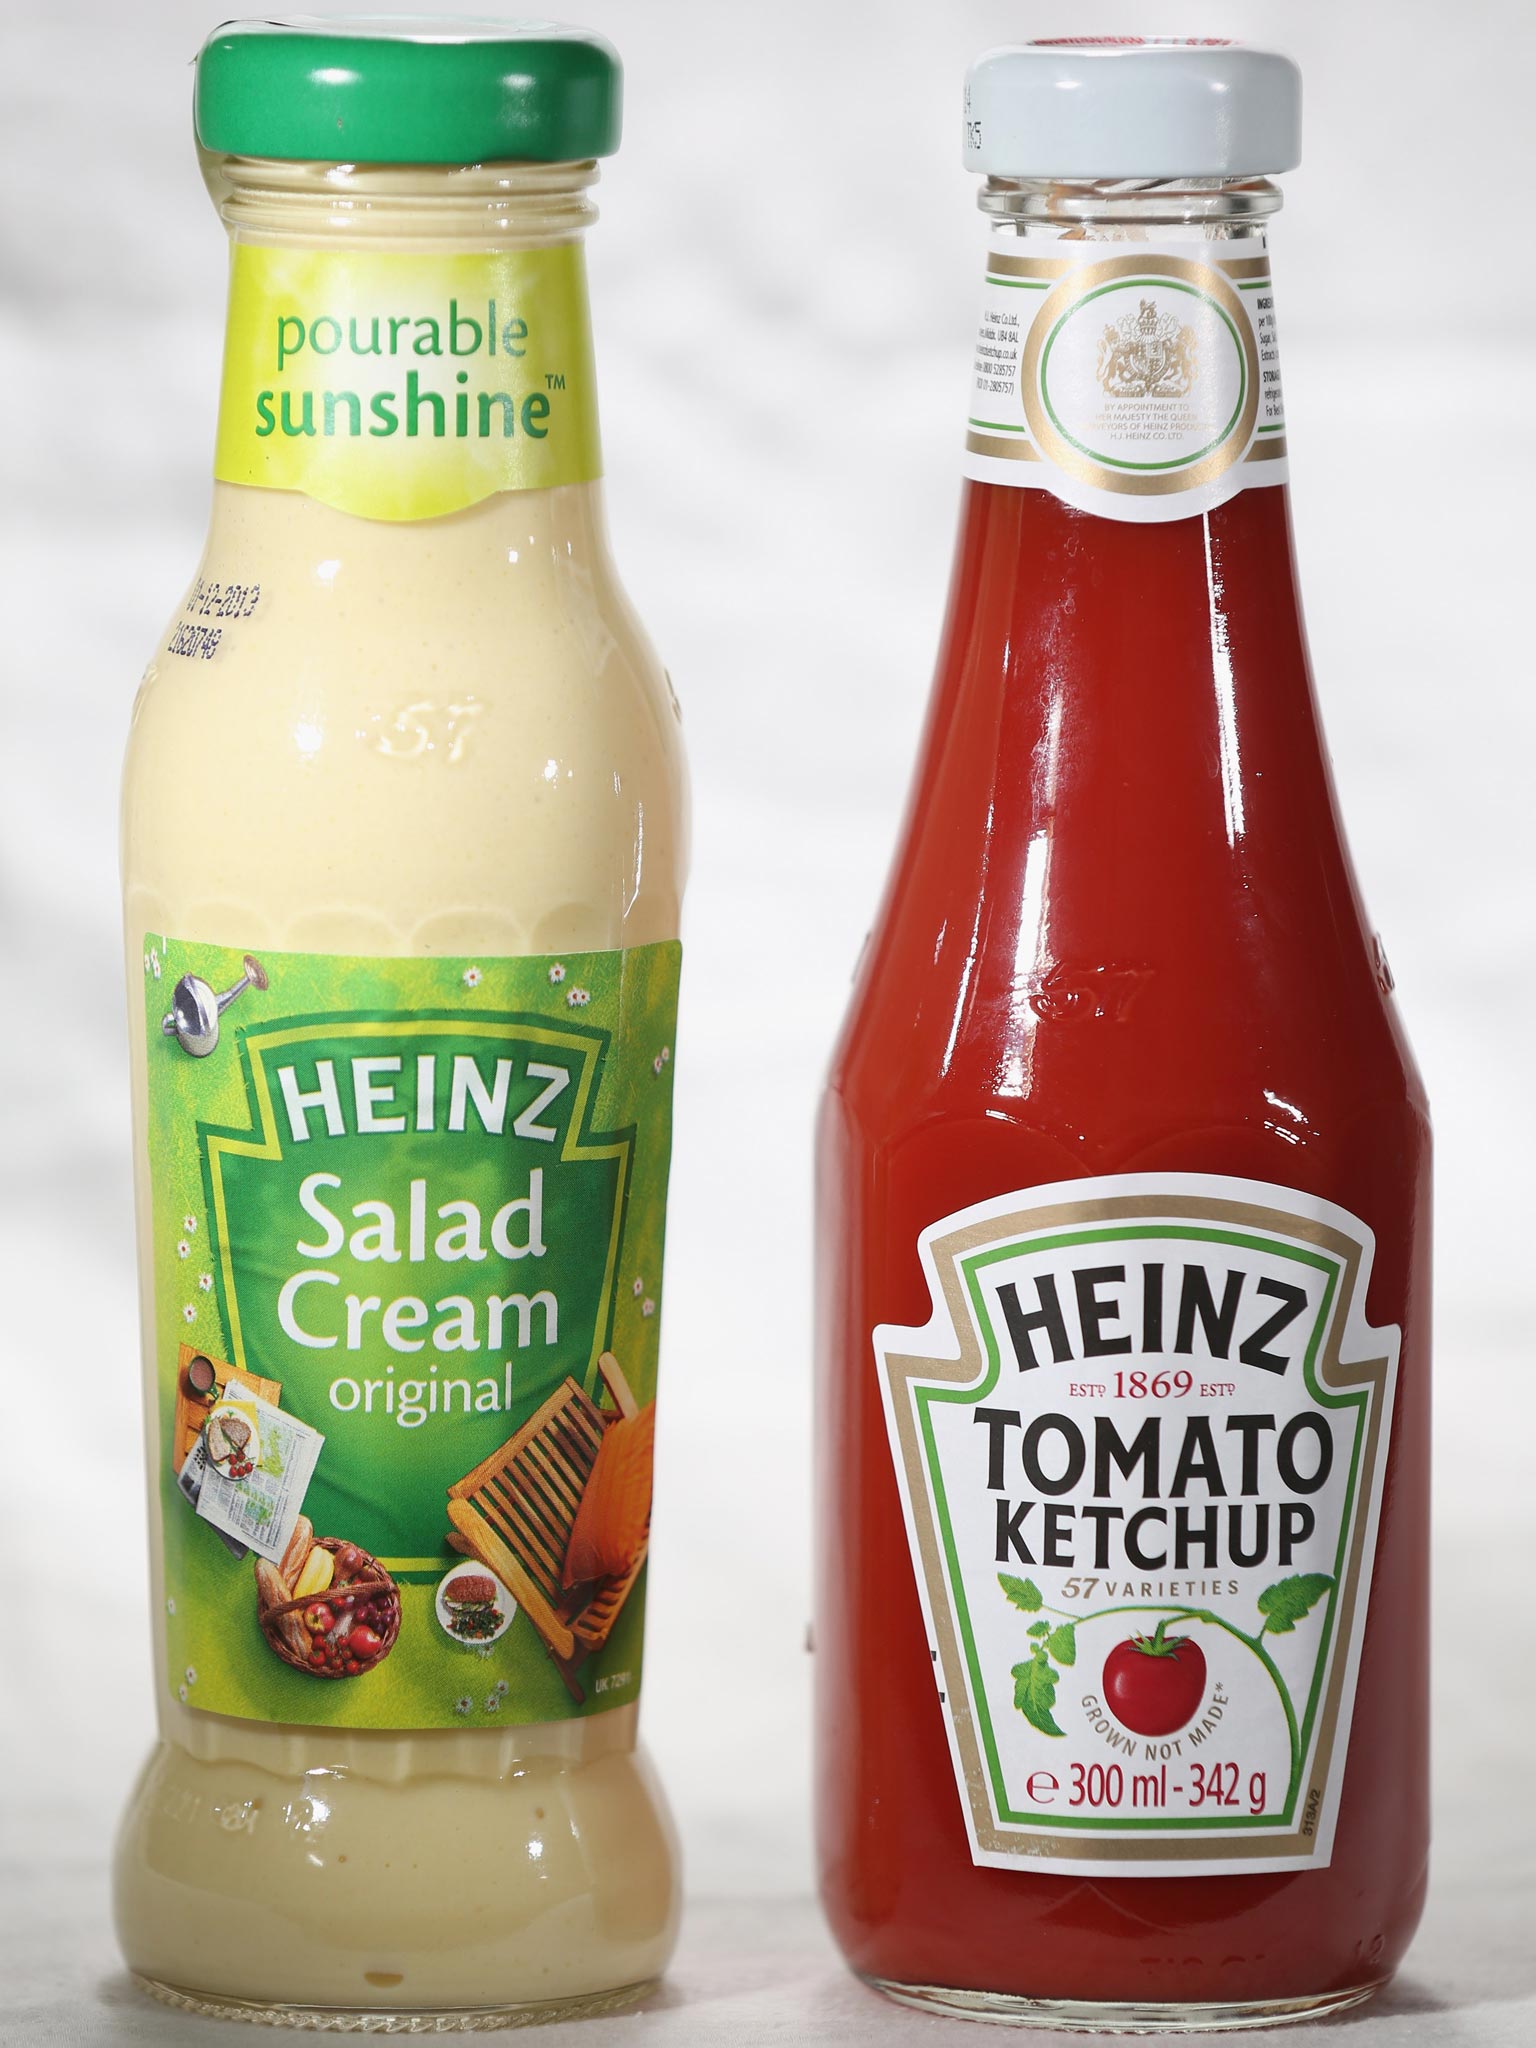 Roy Hodgson has lifted the team ban on ketchup but what about salad cream?